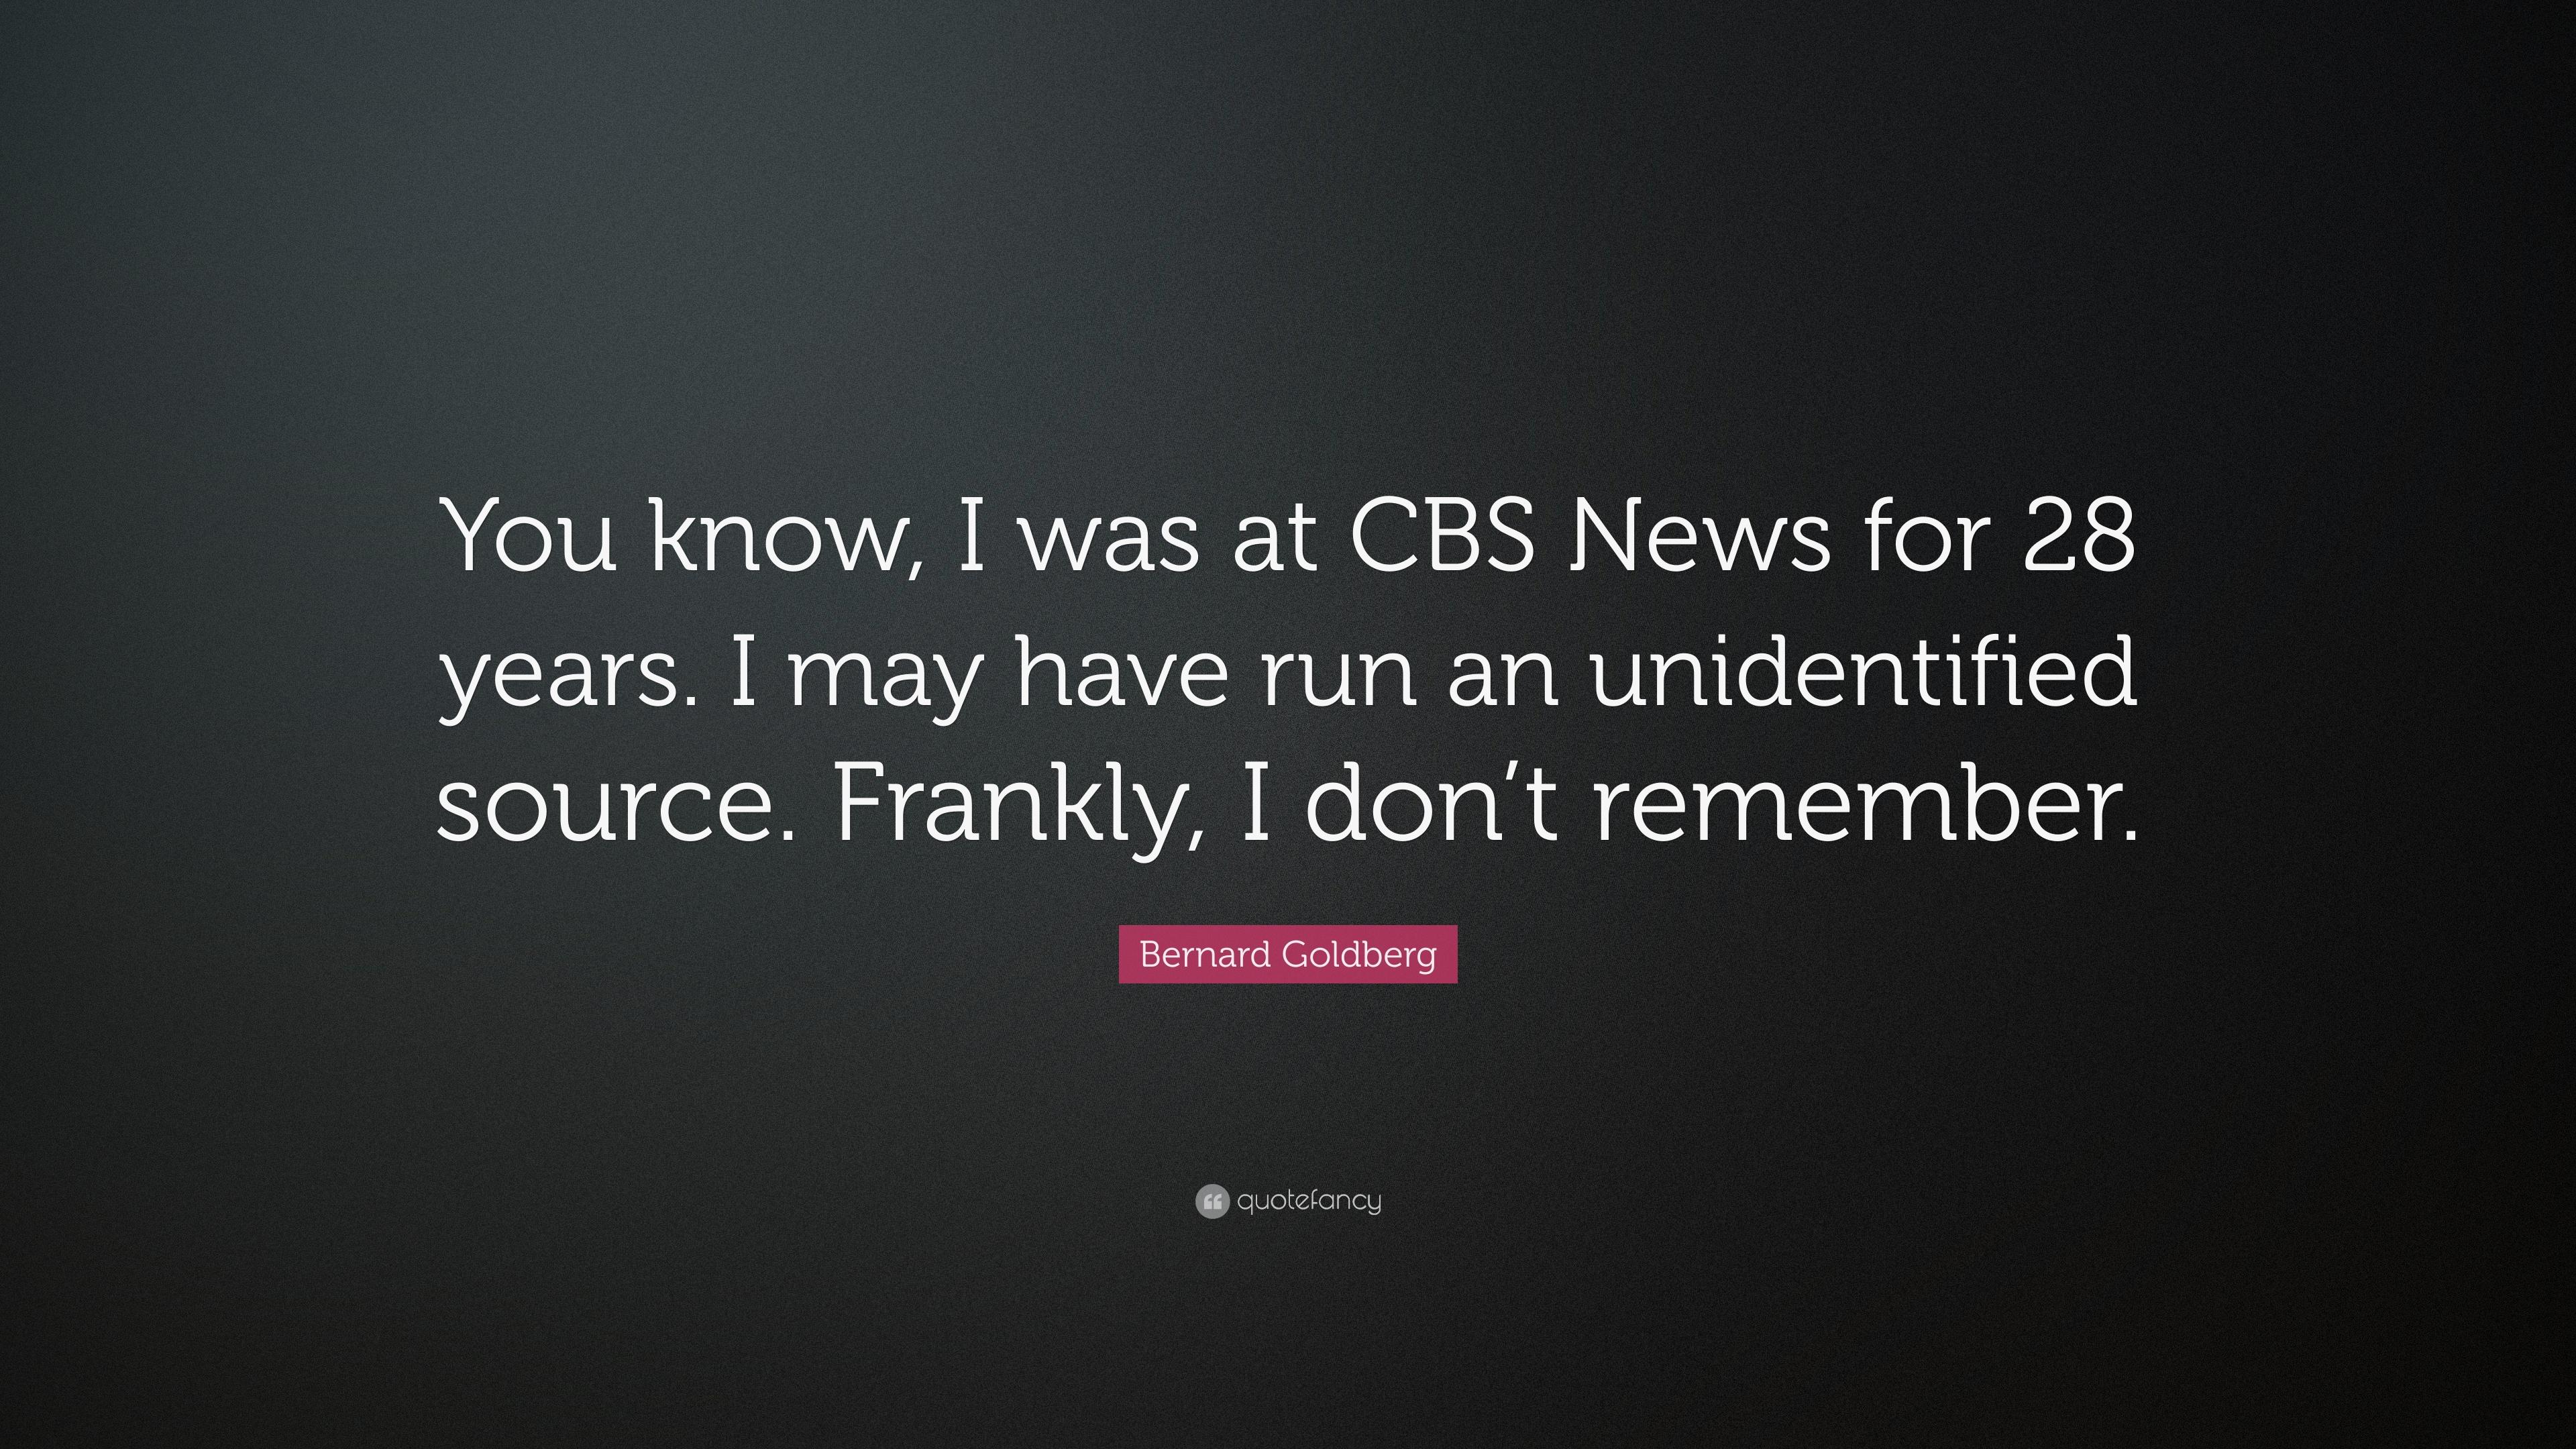 Bernard Goldberg Quote: “You know, I was at CBS News for 28 years. I